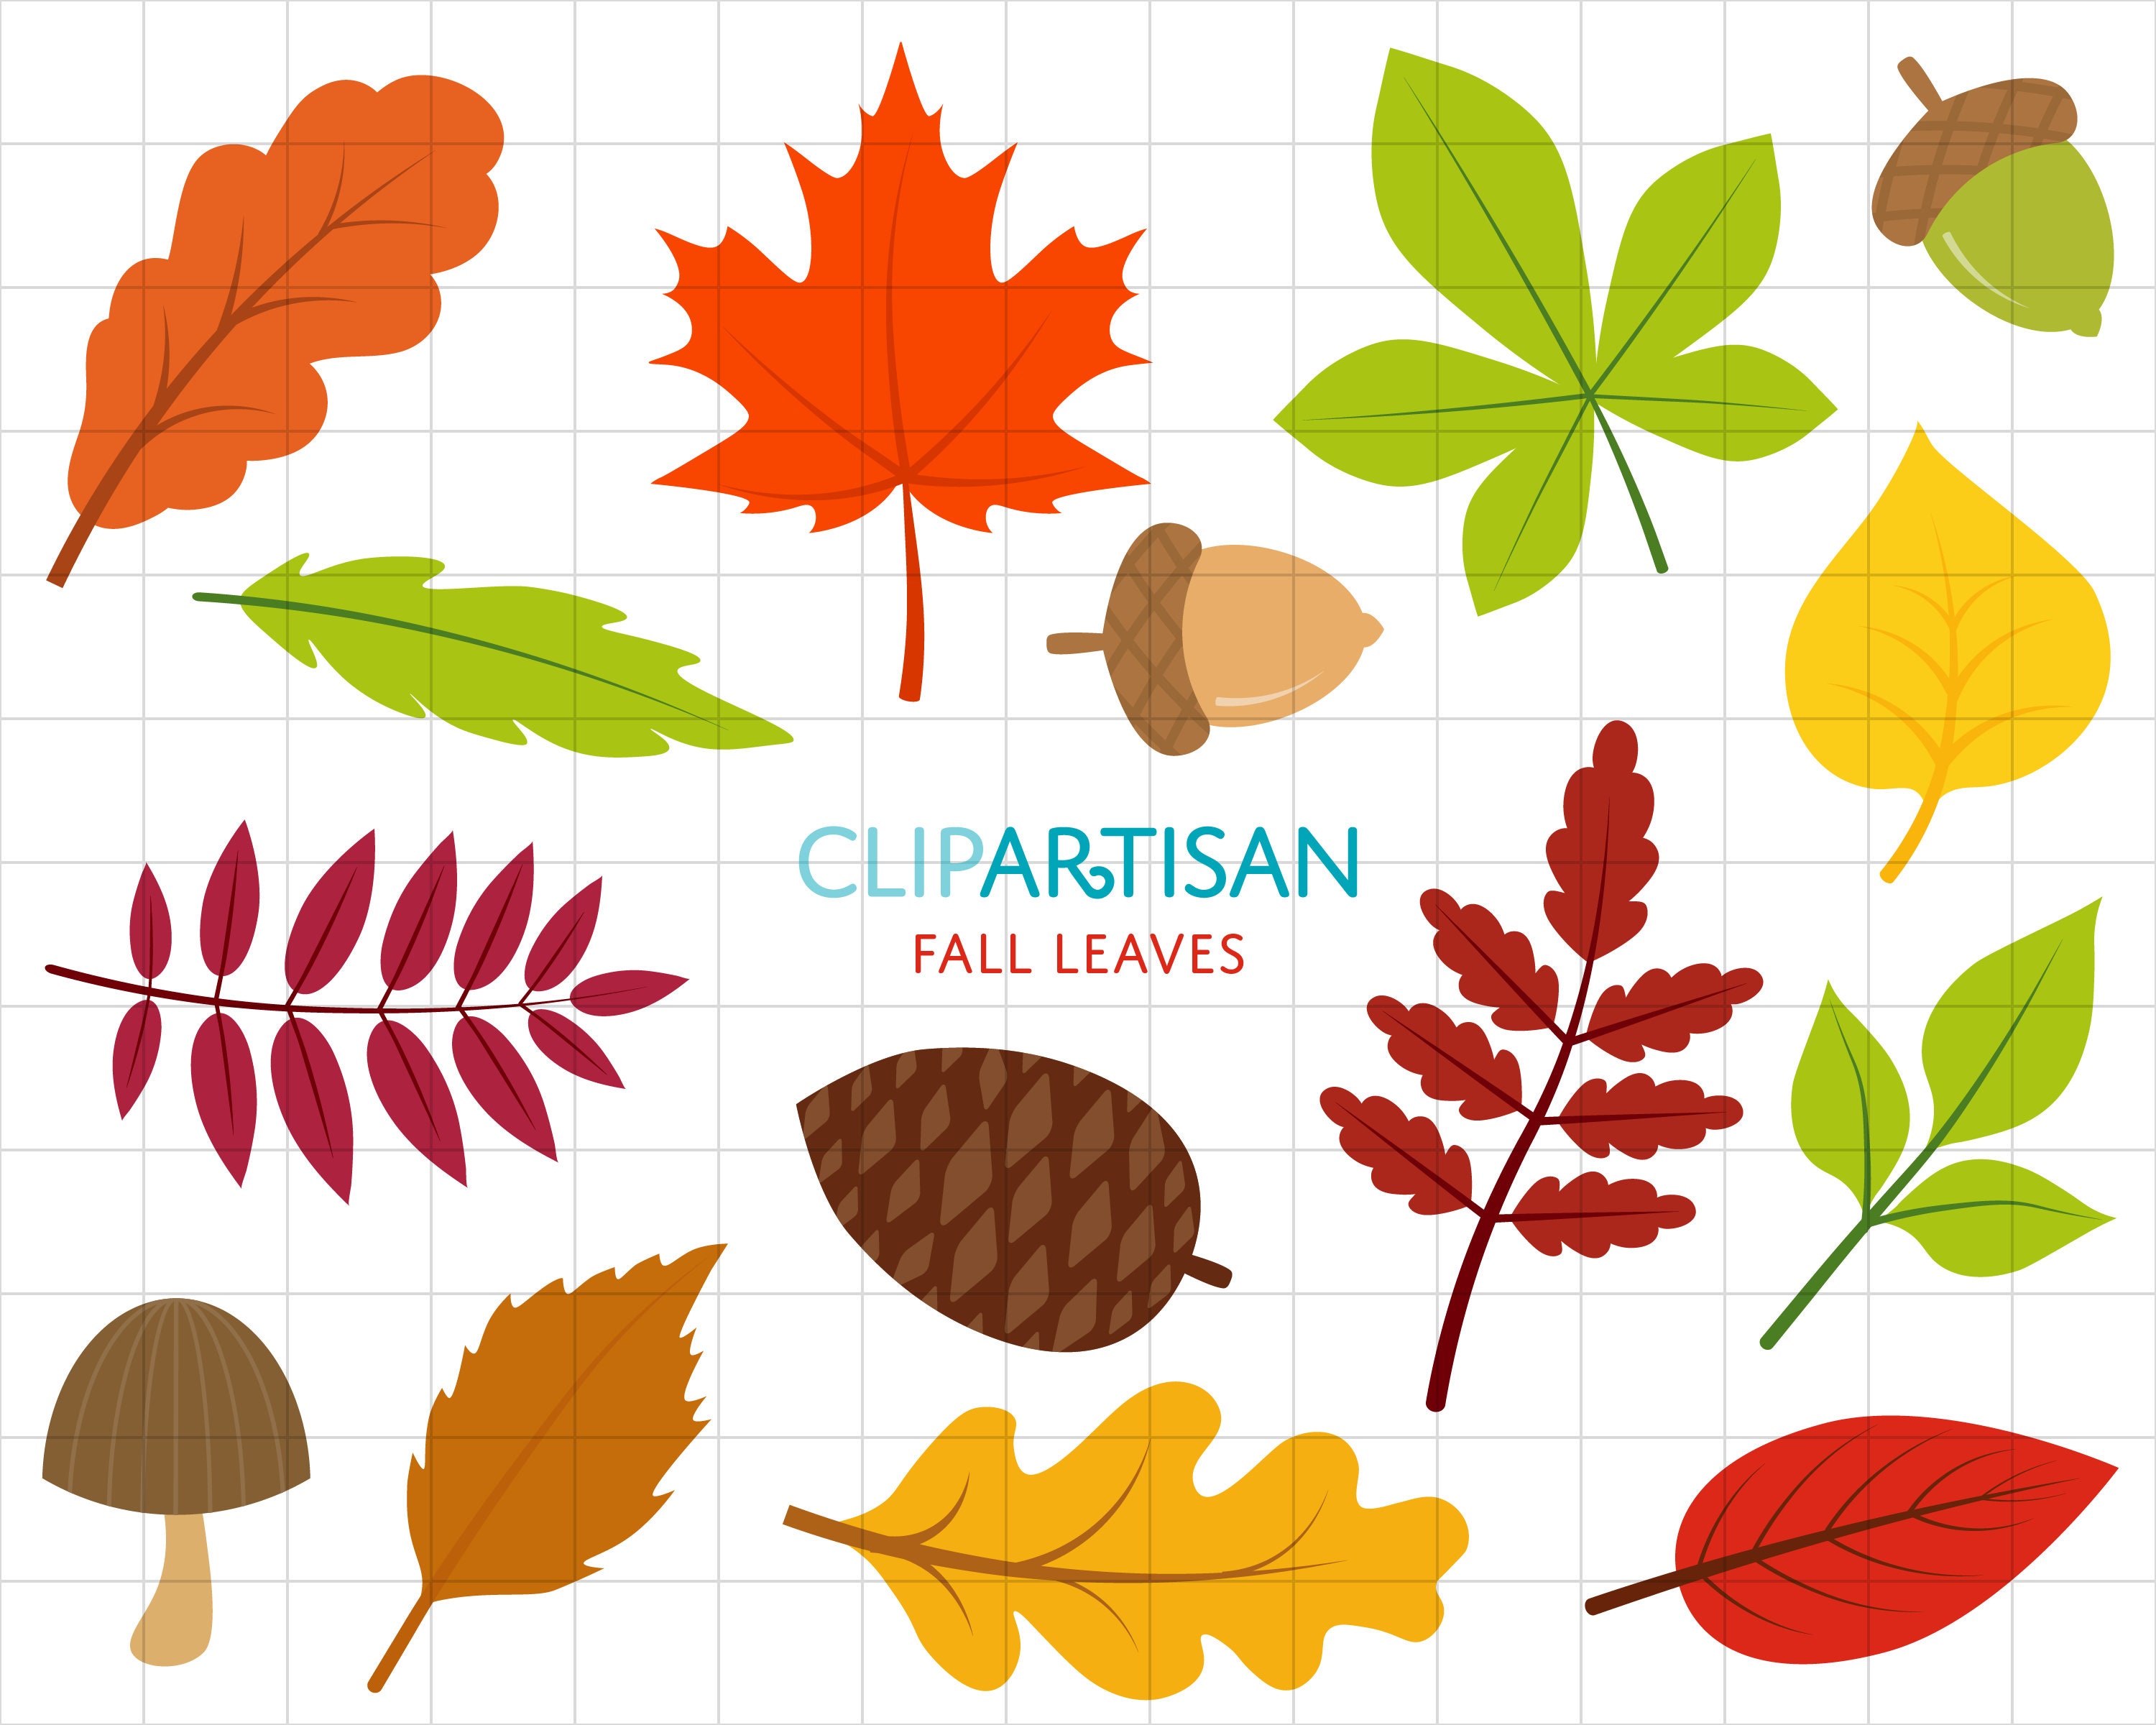 Color Words to Describe Autumn Leaves